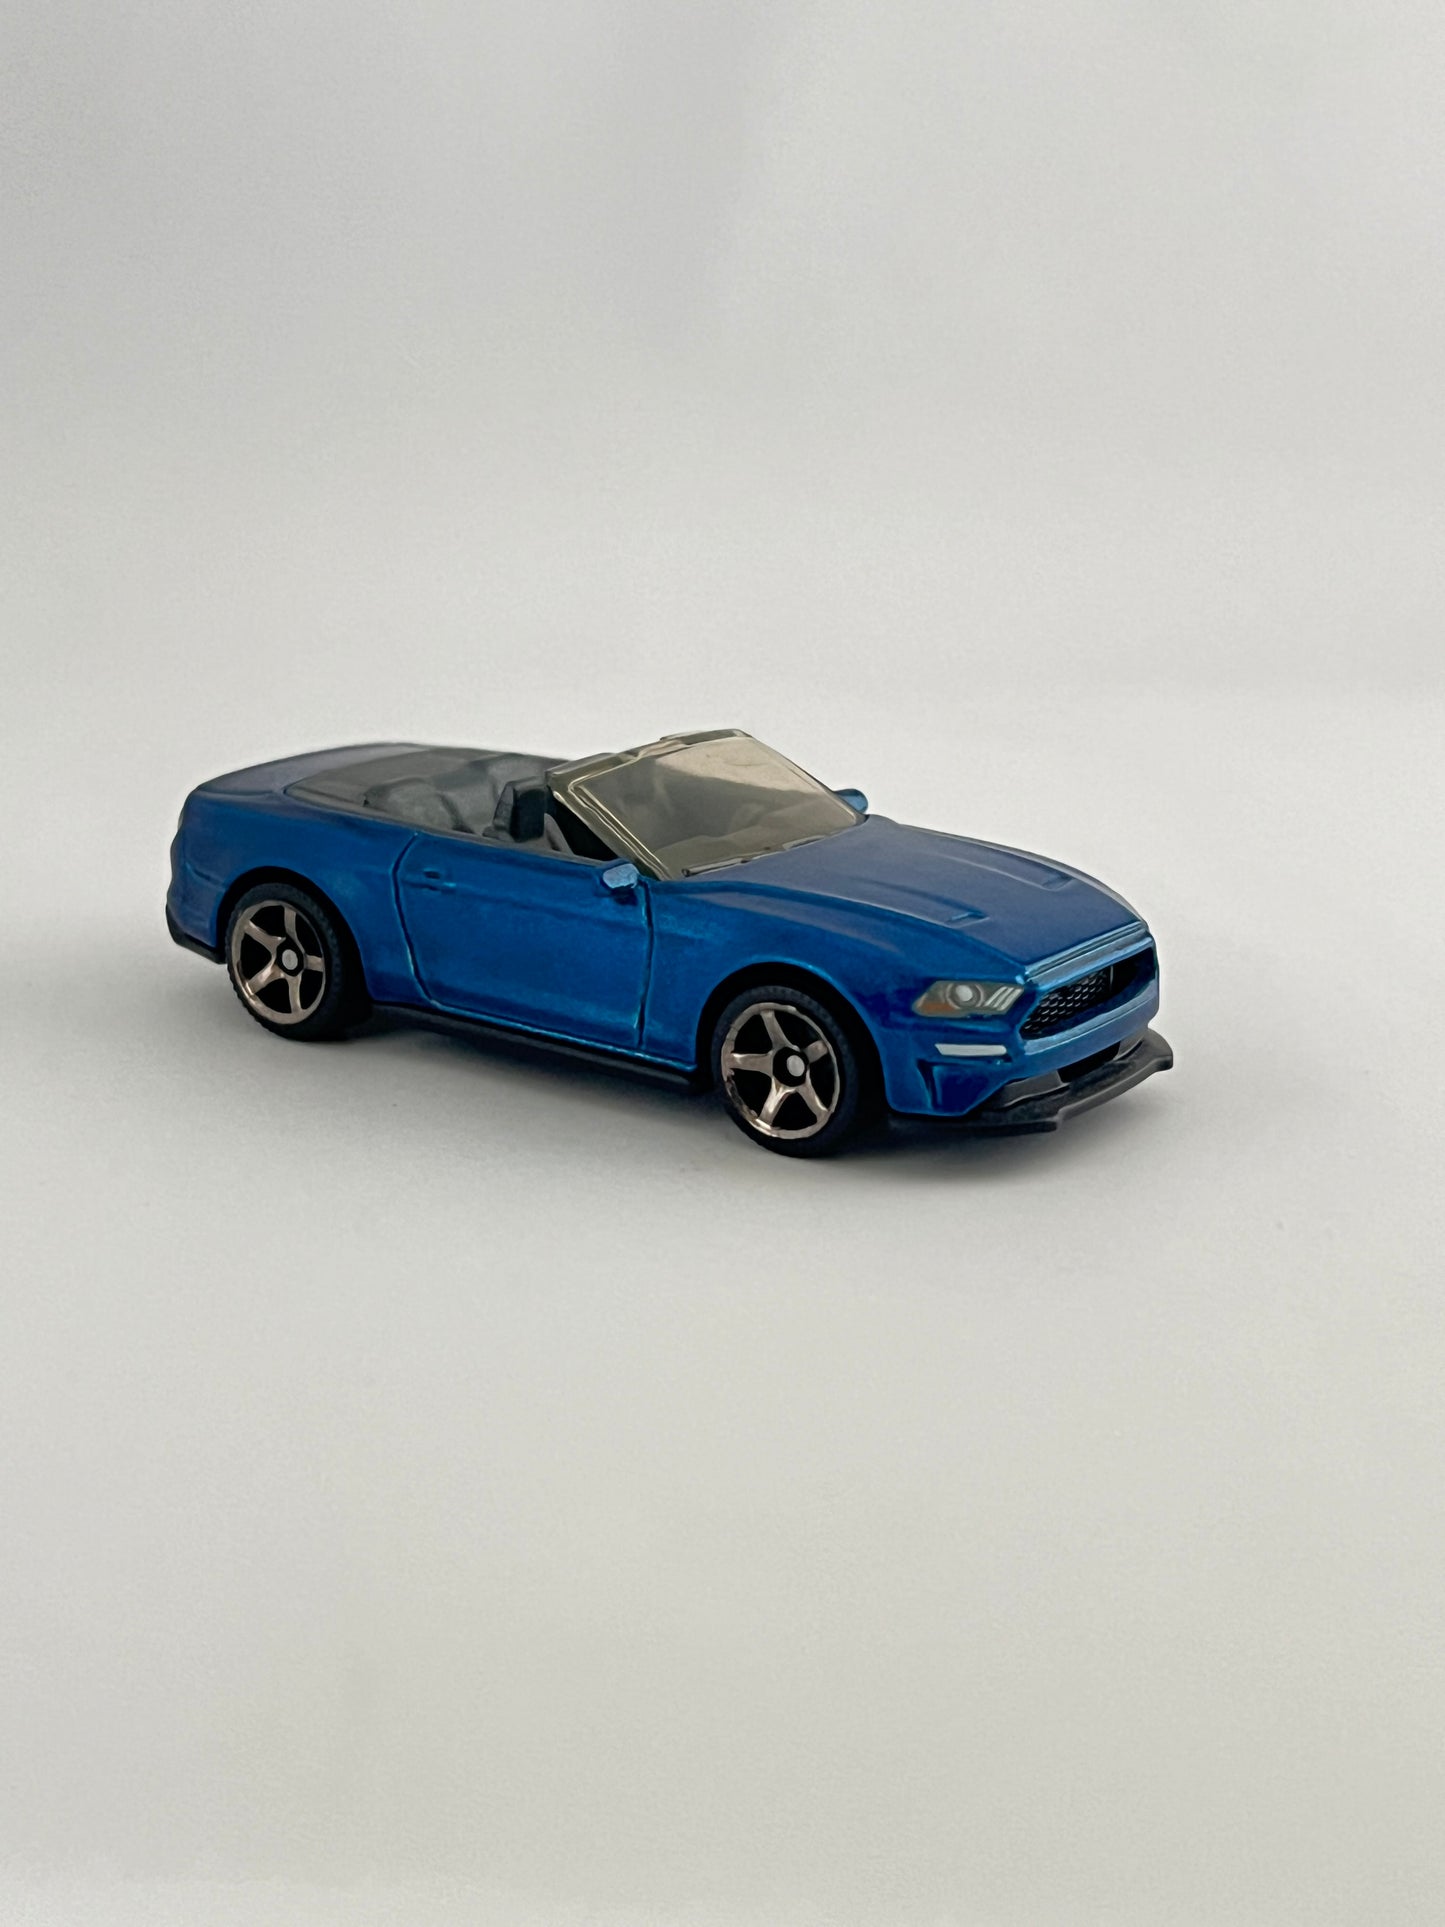 2018 FORD MUSTANG CONVERTIBLE - UNCARDED - MINT